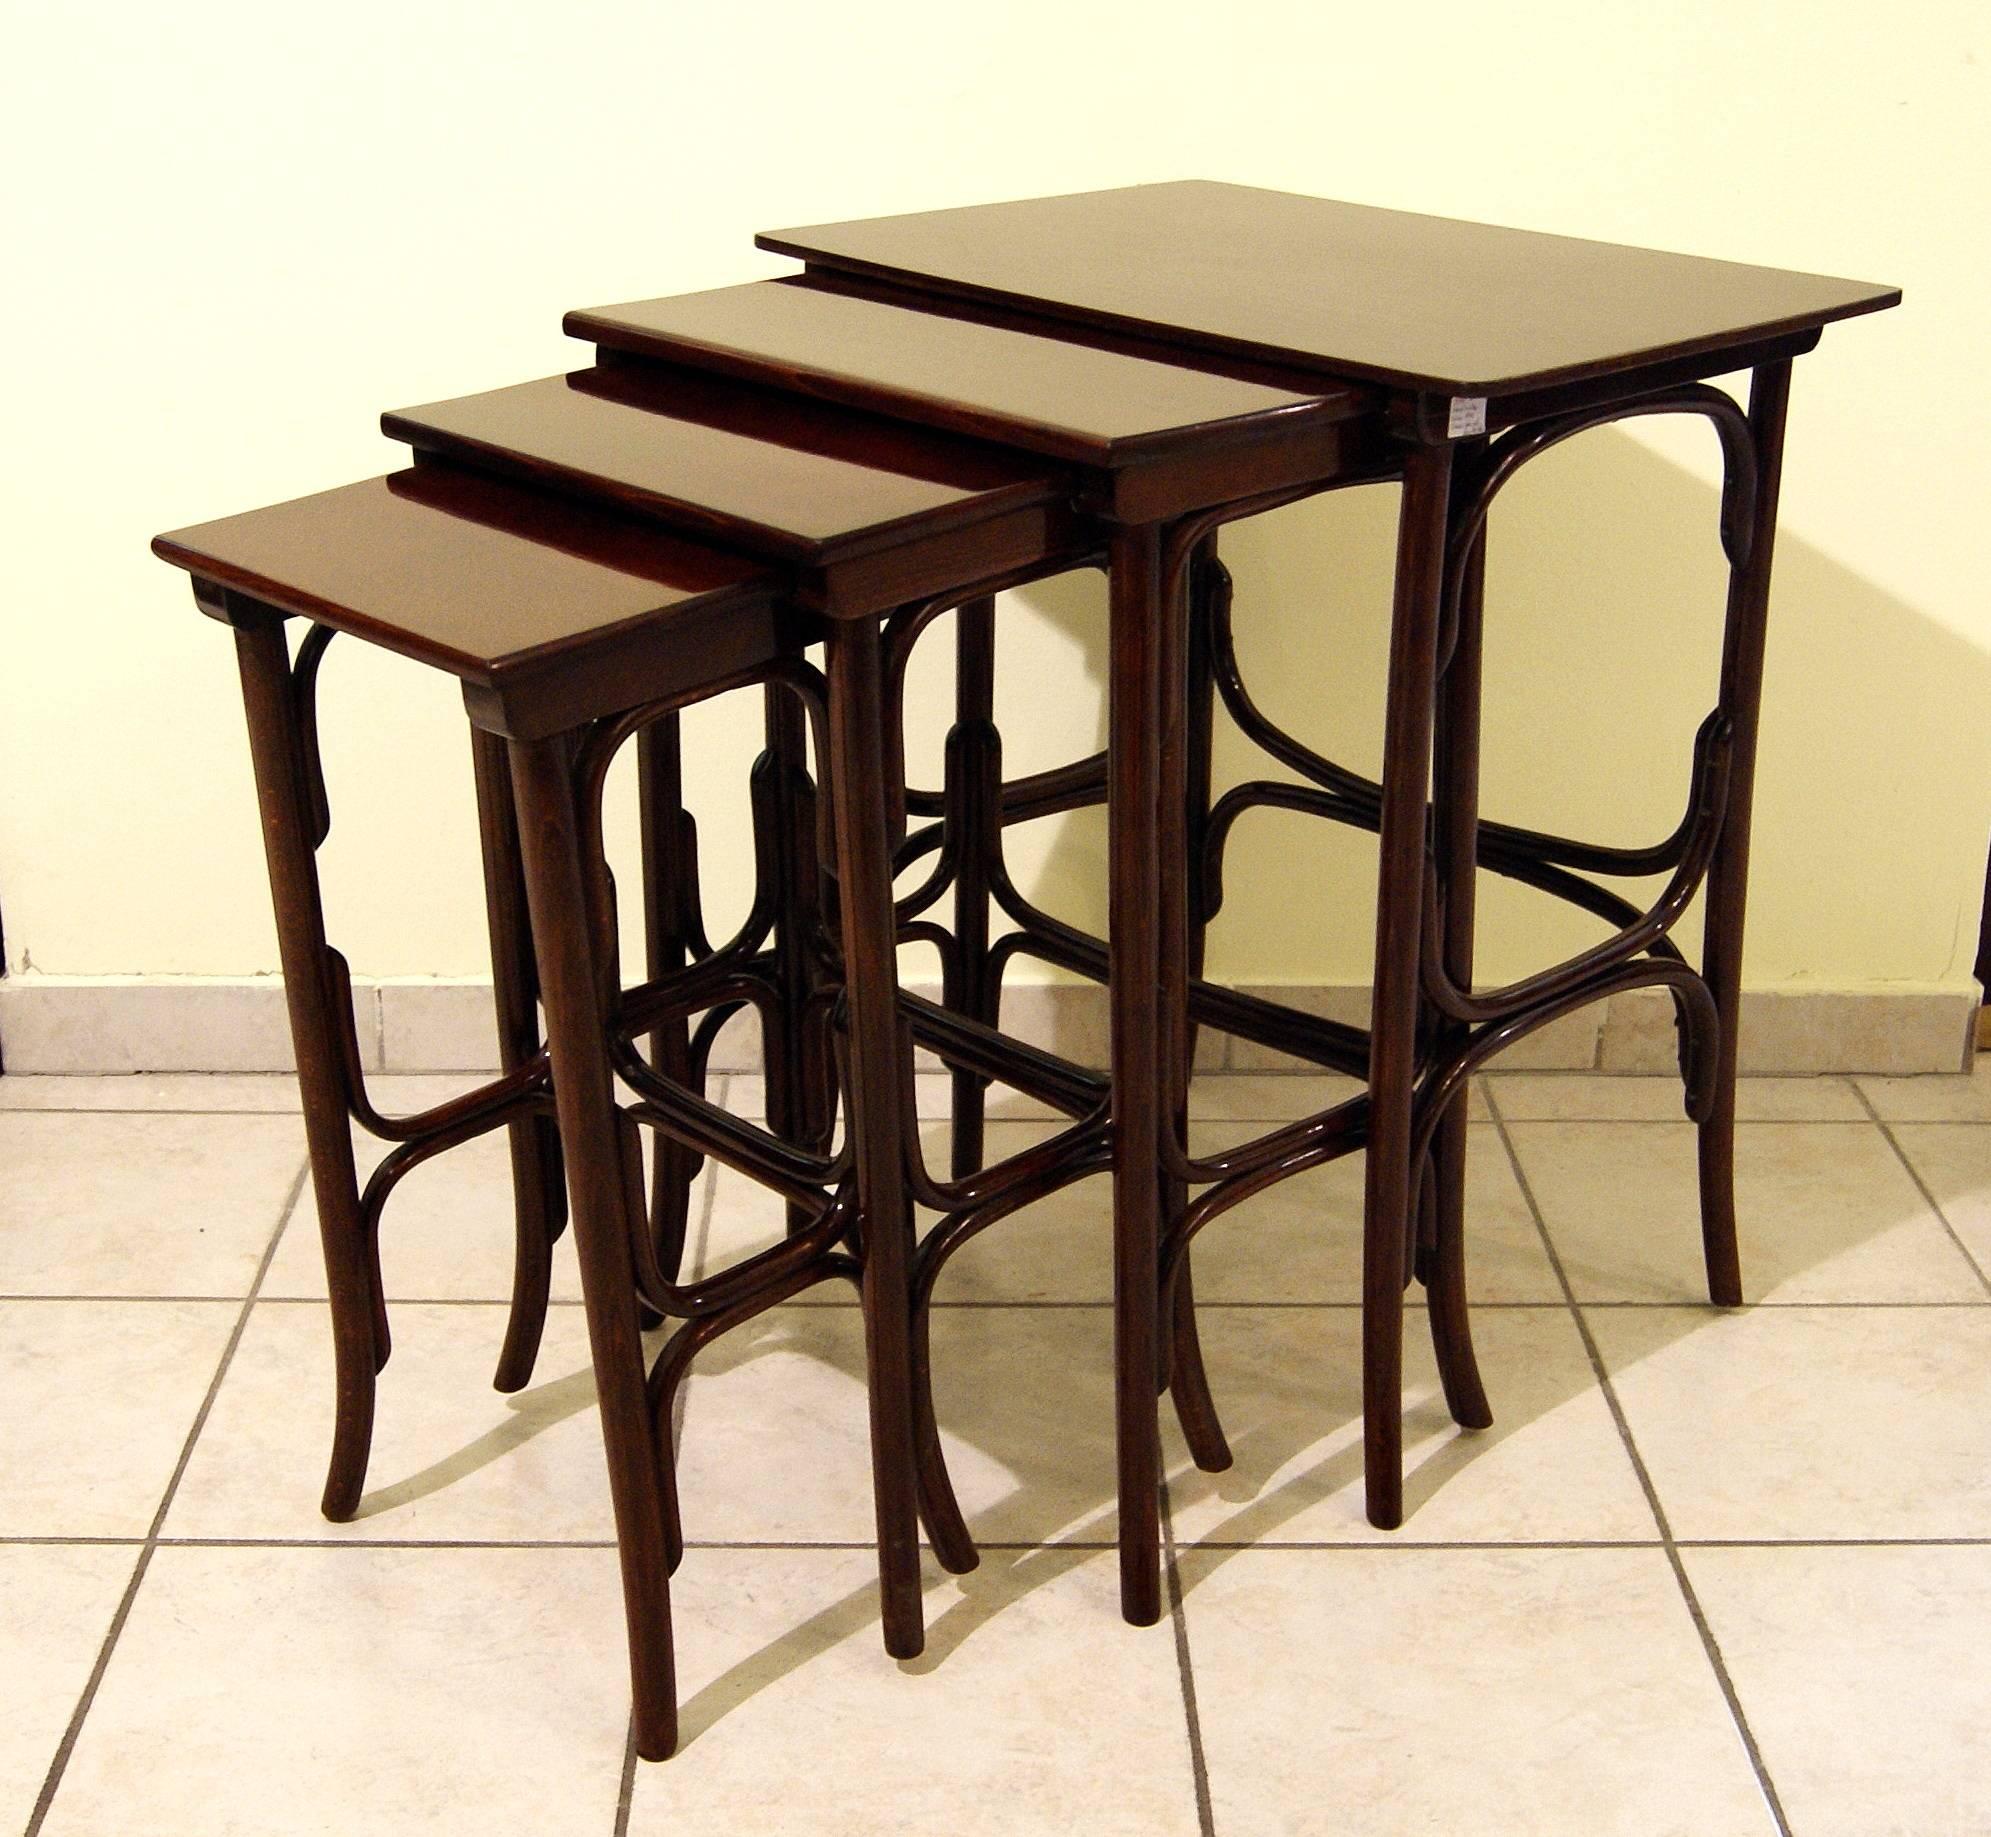 Stained Thonet Art Nouveau Vienna Nesting Tables Four Pieces Model Number 10, circa 1905